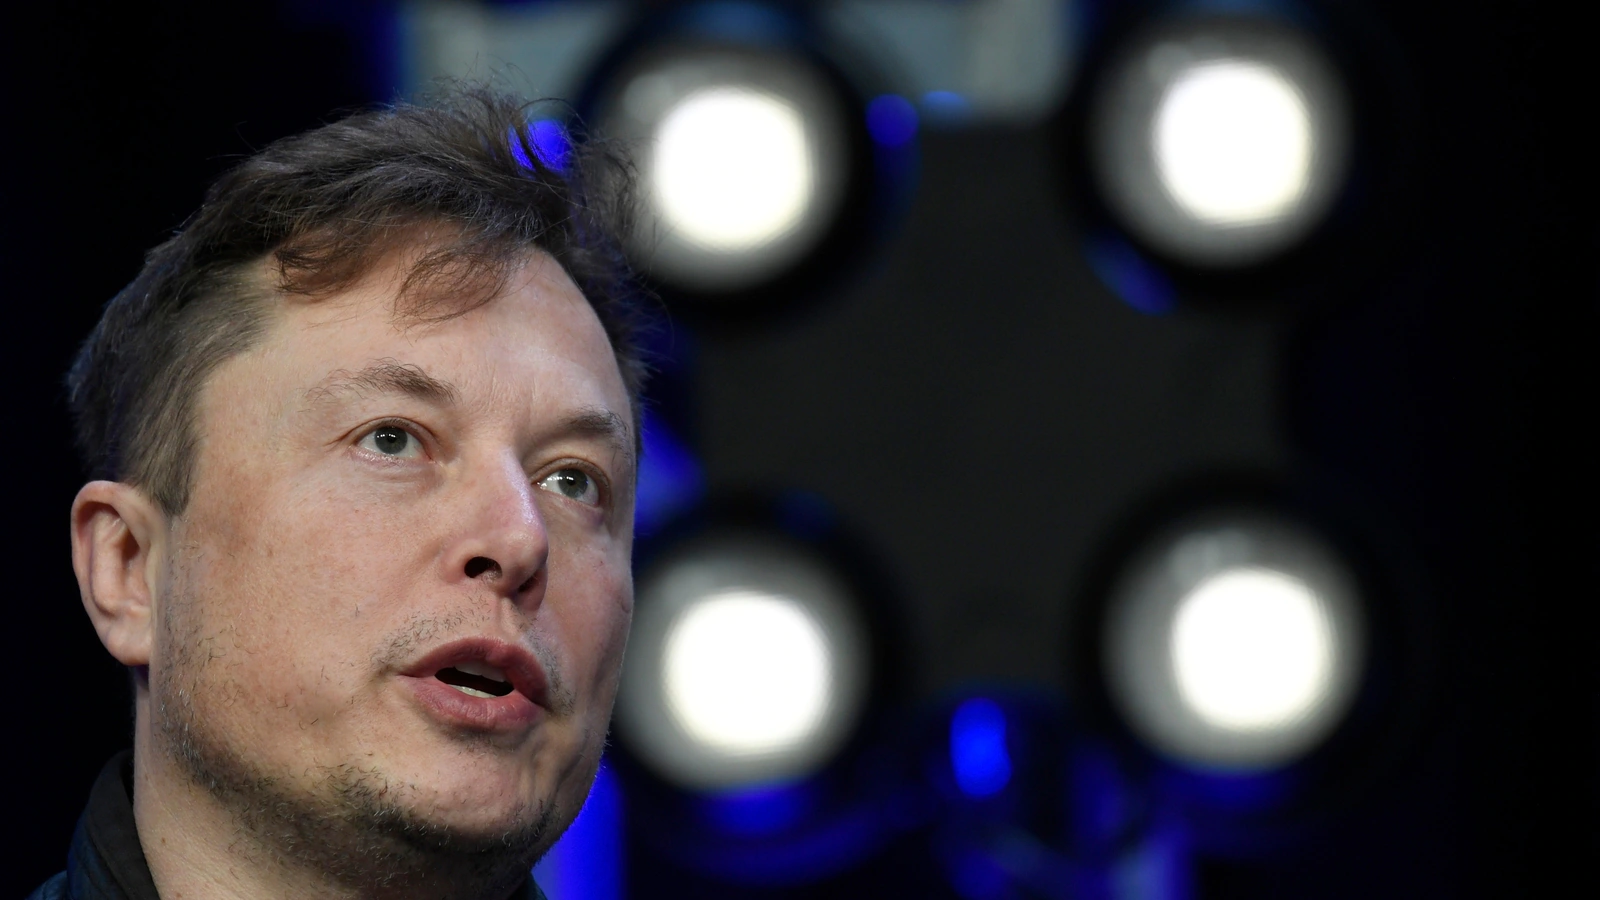 'Taiwan democracy not for sale': Pushback after Elon Musk's 'recommendation'